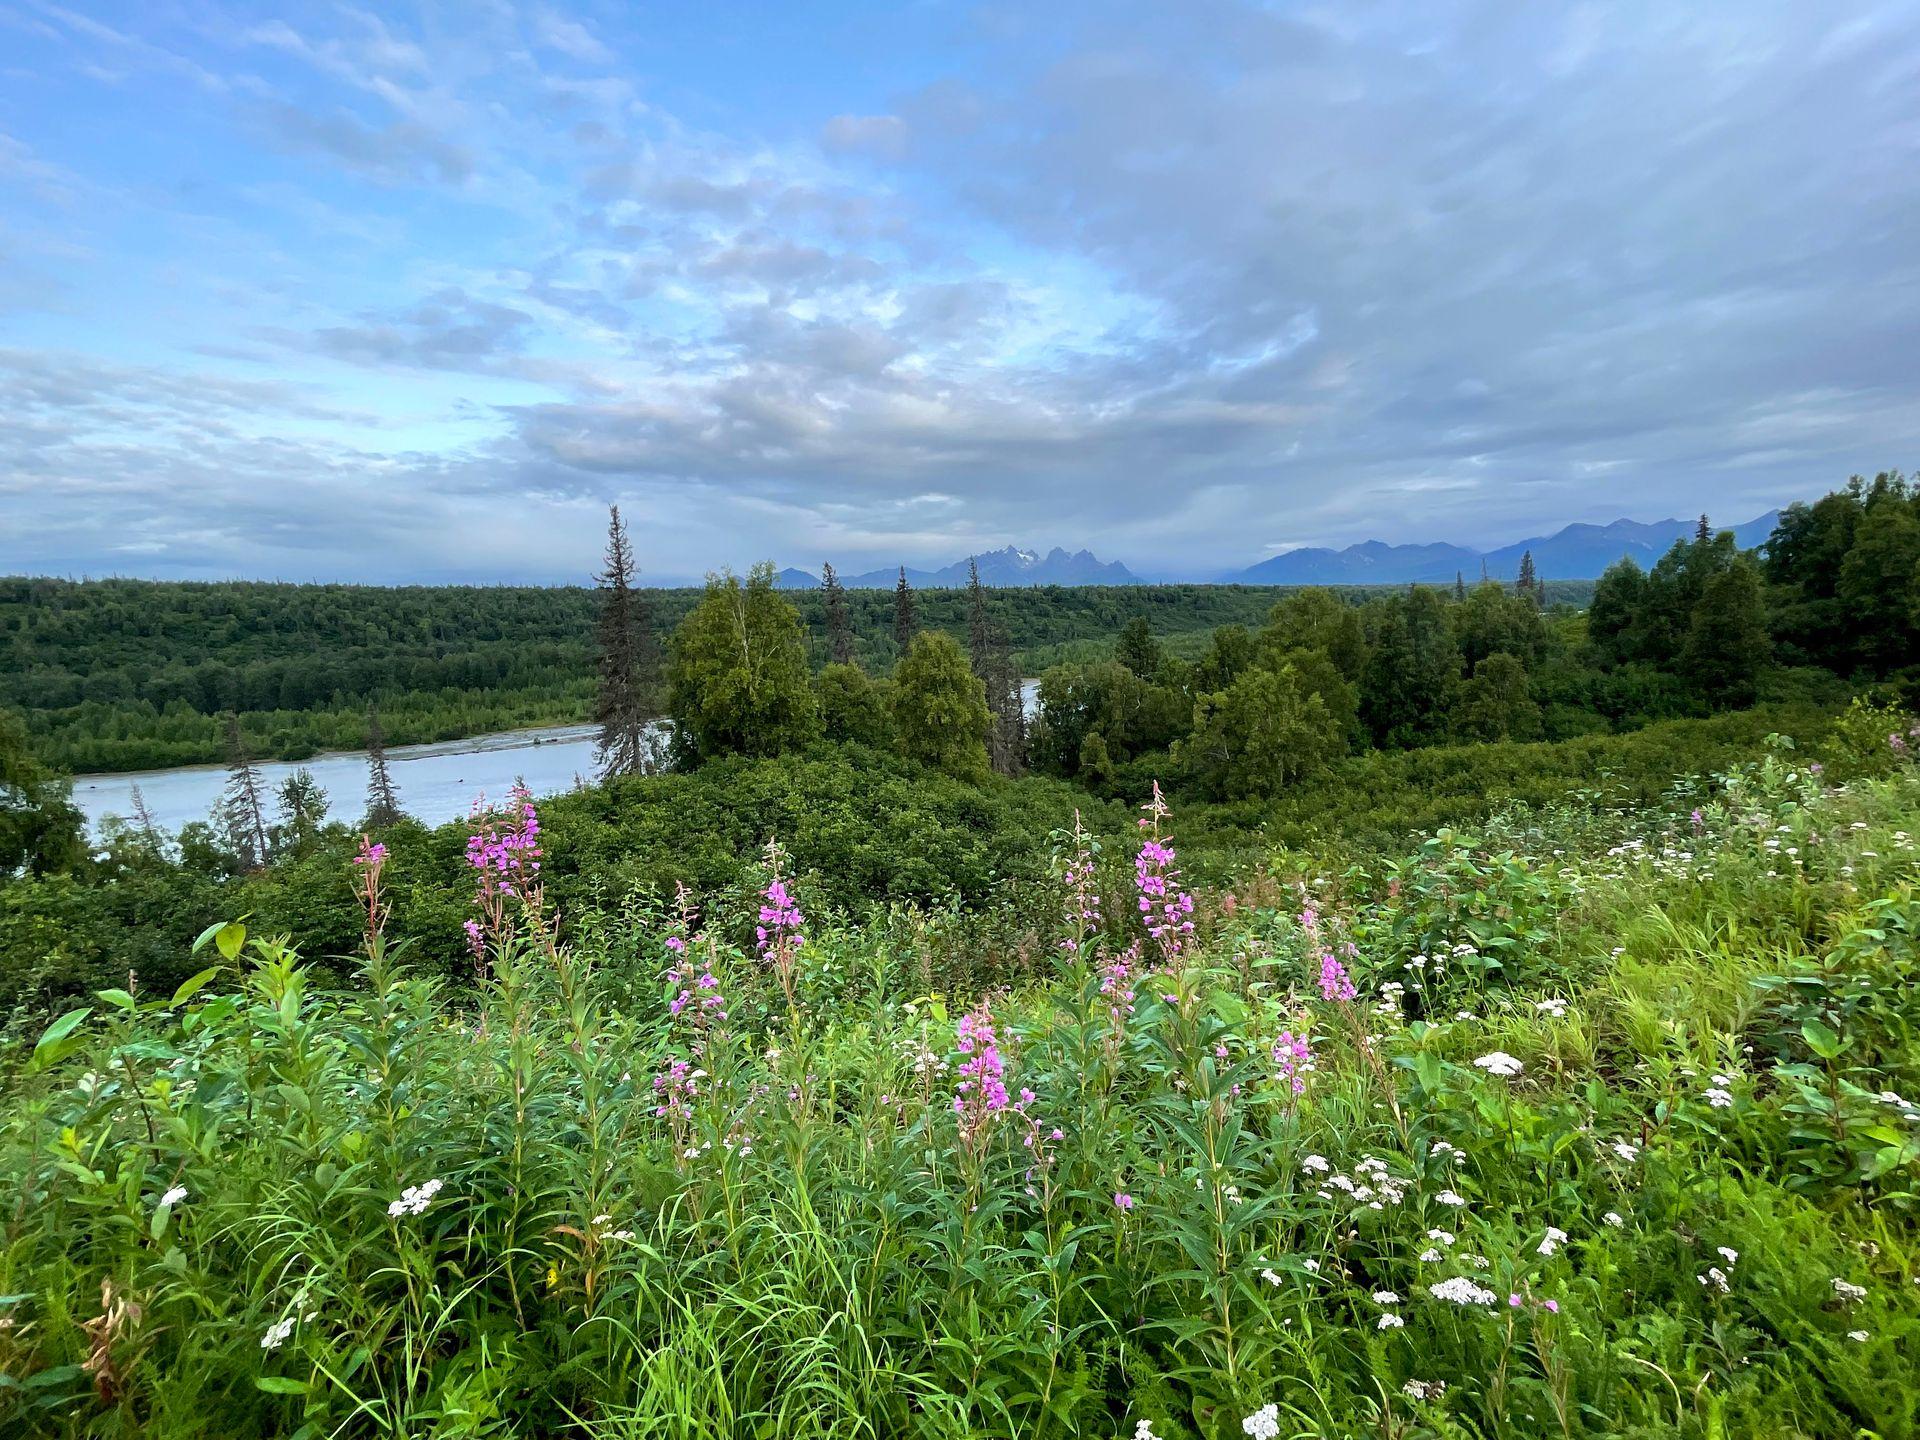 A view of greenery and wildflowers, a river and moutains in the distnace from the Denali State Park southern viewpoint.